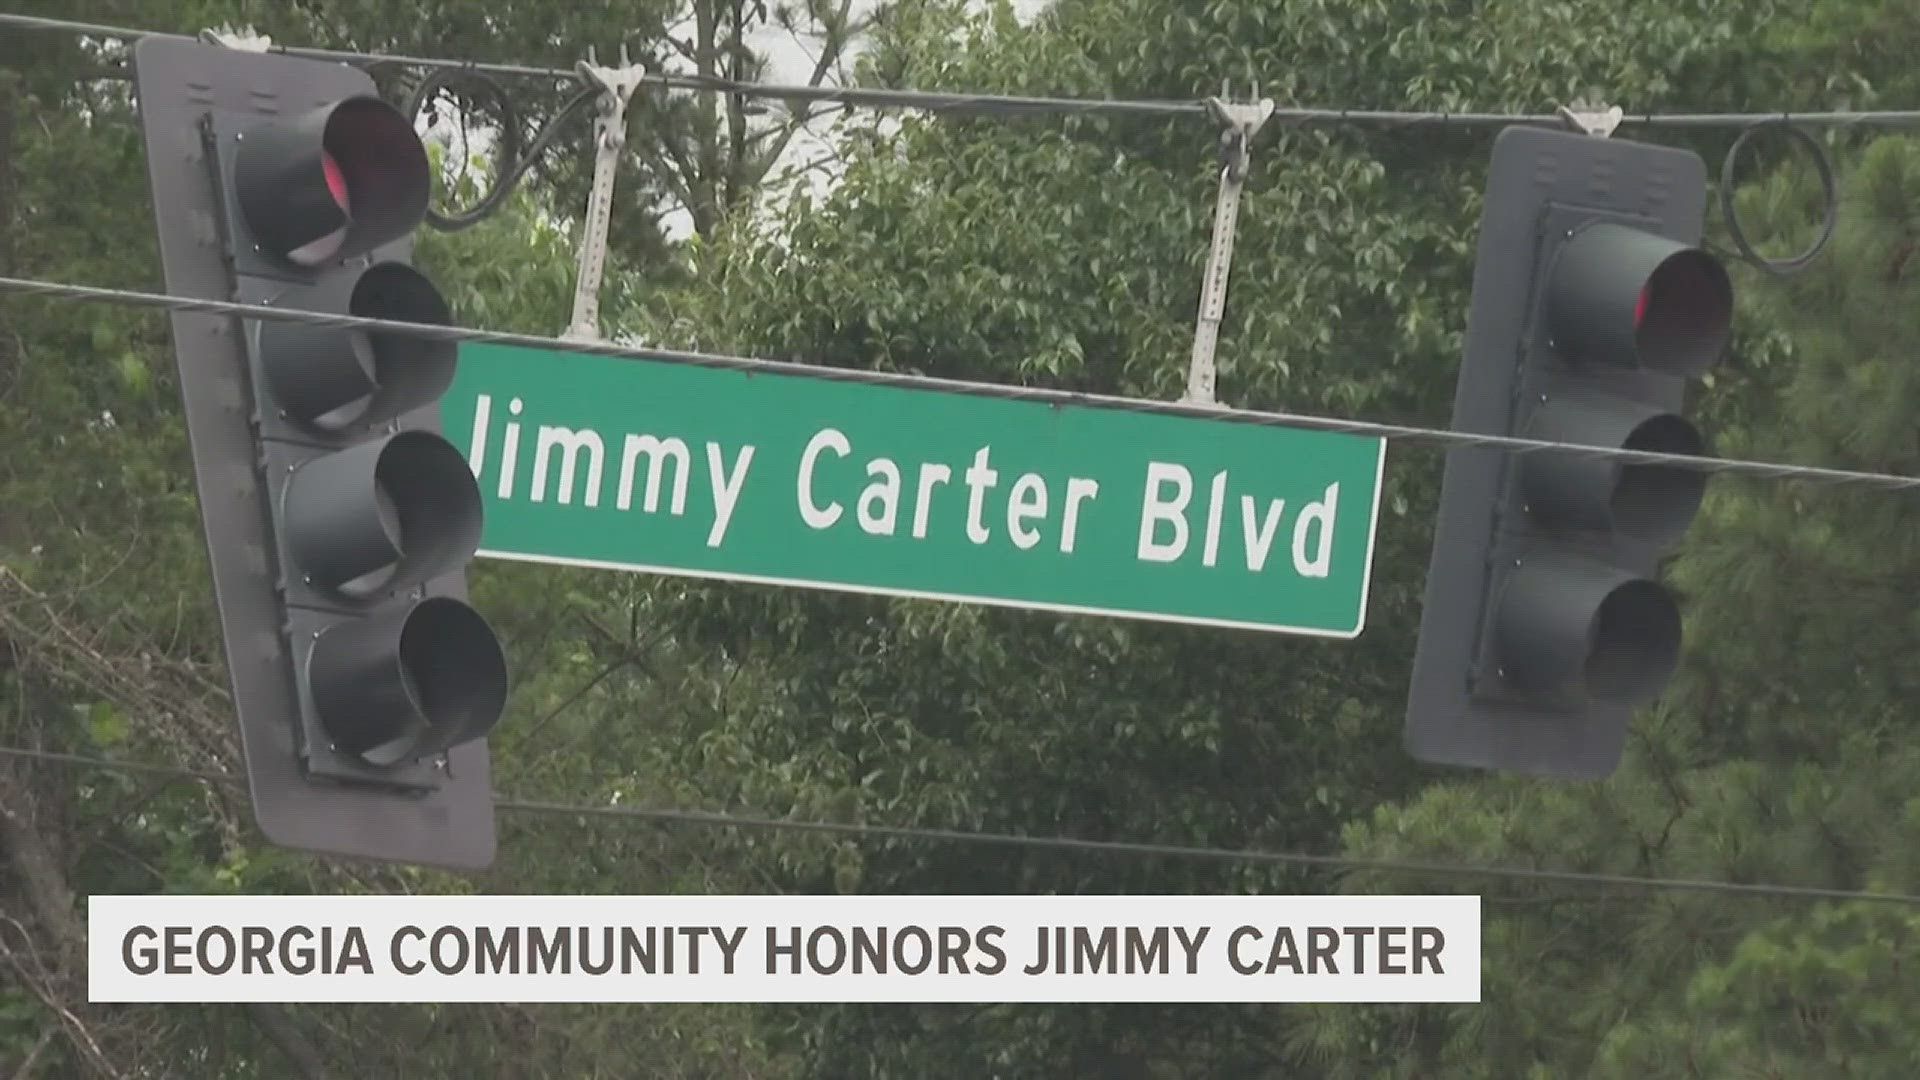 As former President Jimmy Carter rests in hospice, a suburb in Georgia celebrates his legacy.